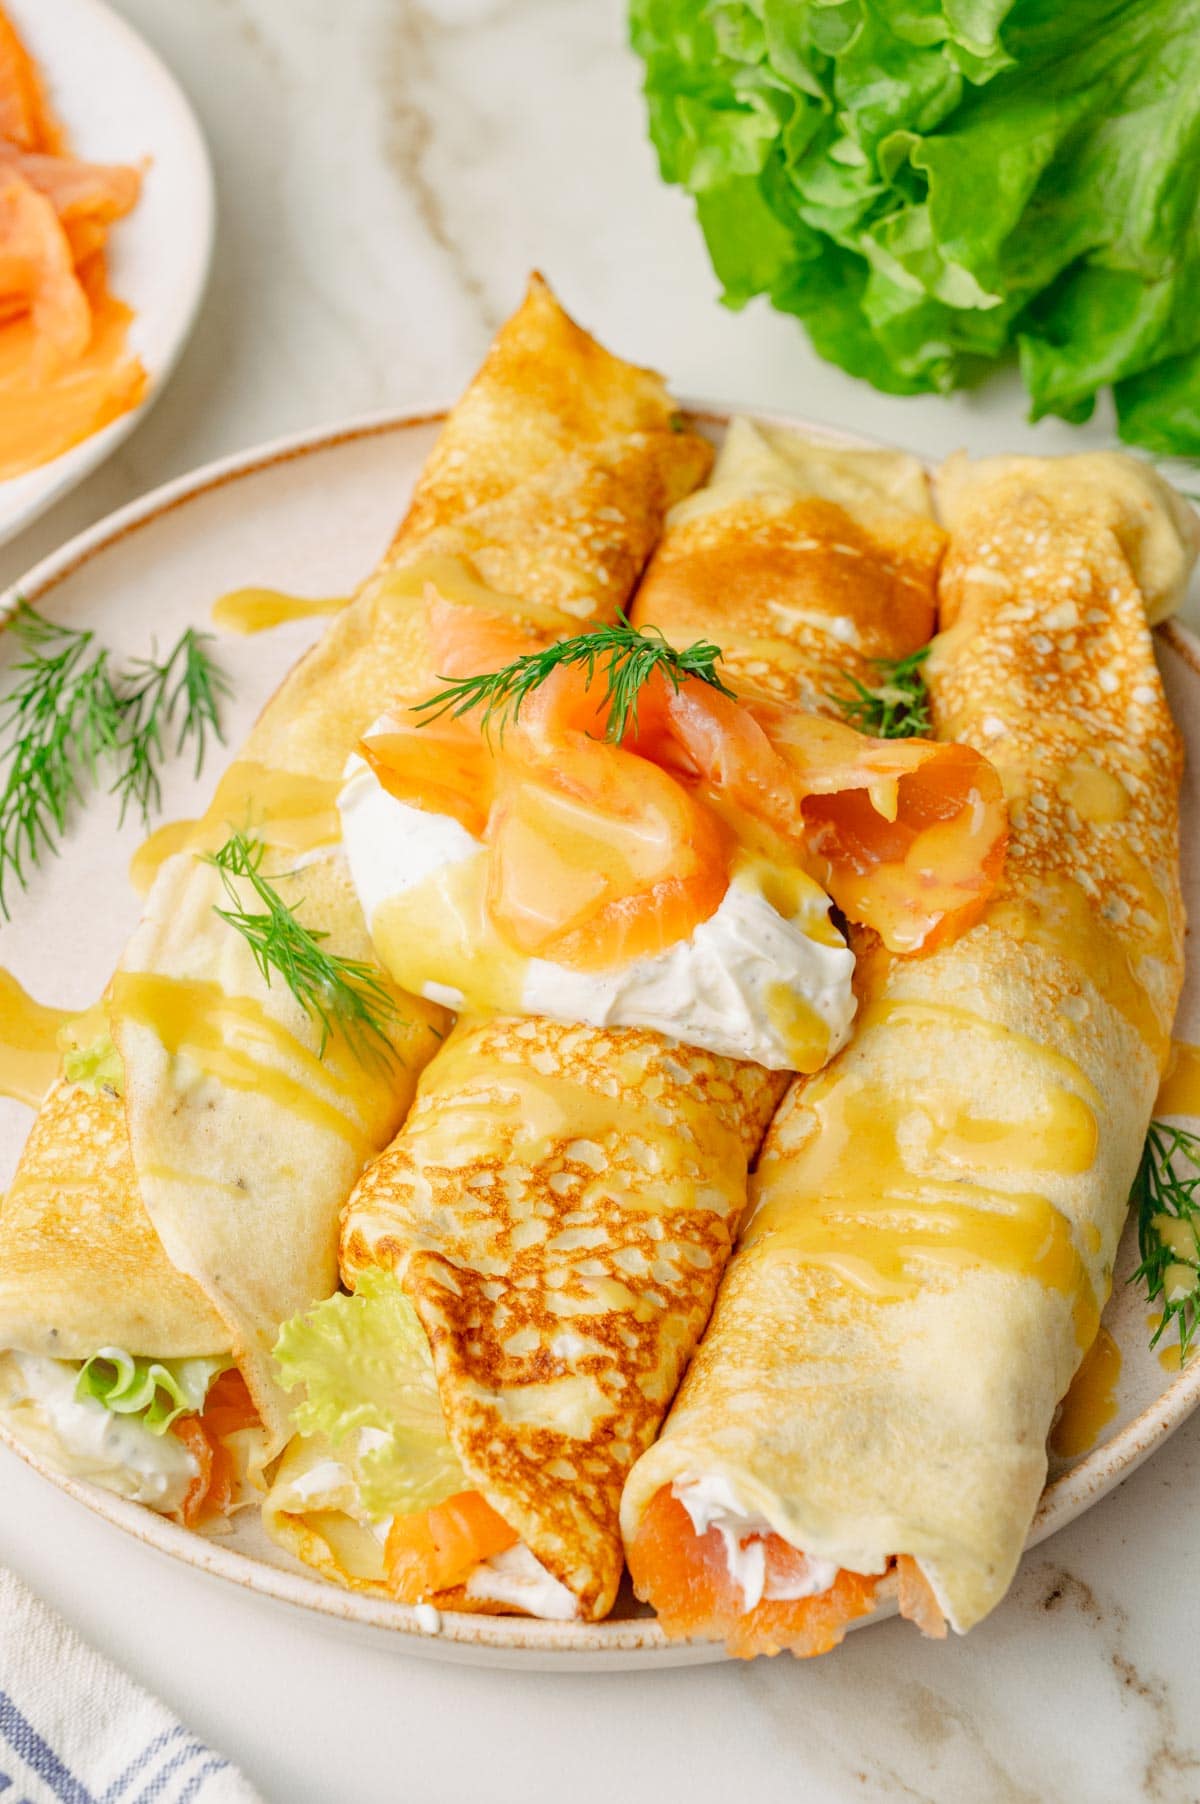 Savory crepes with smoked salmon, cream cheese and honey mustard sauce on a beige plate.